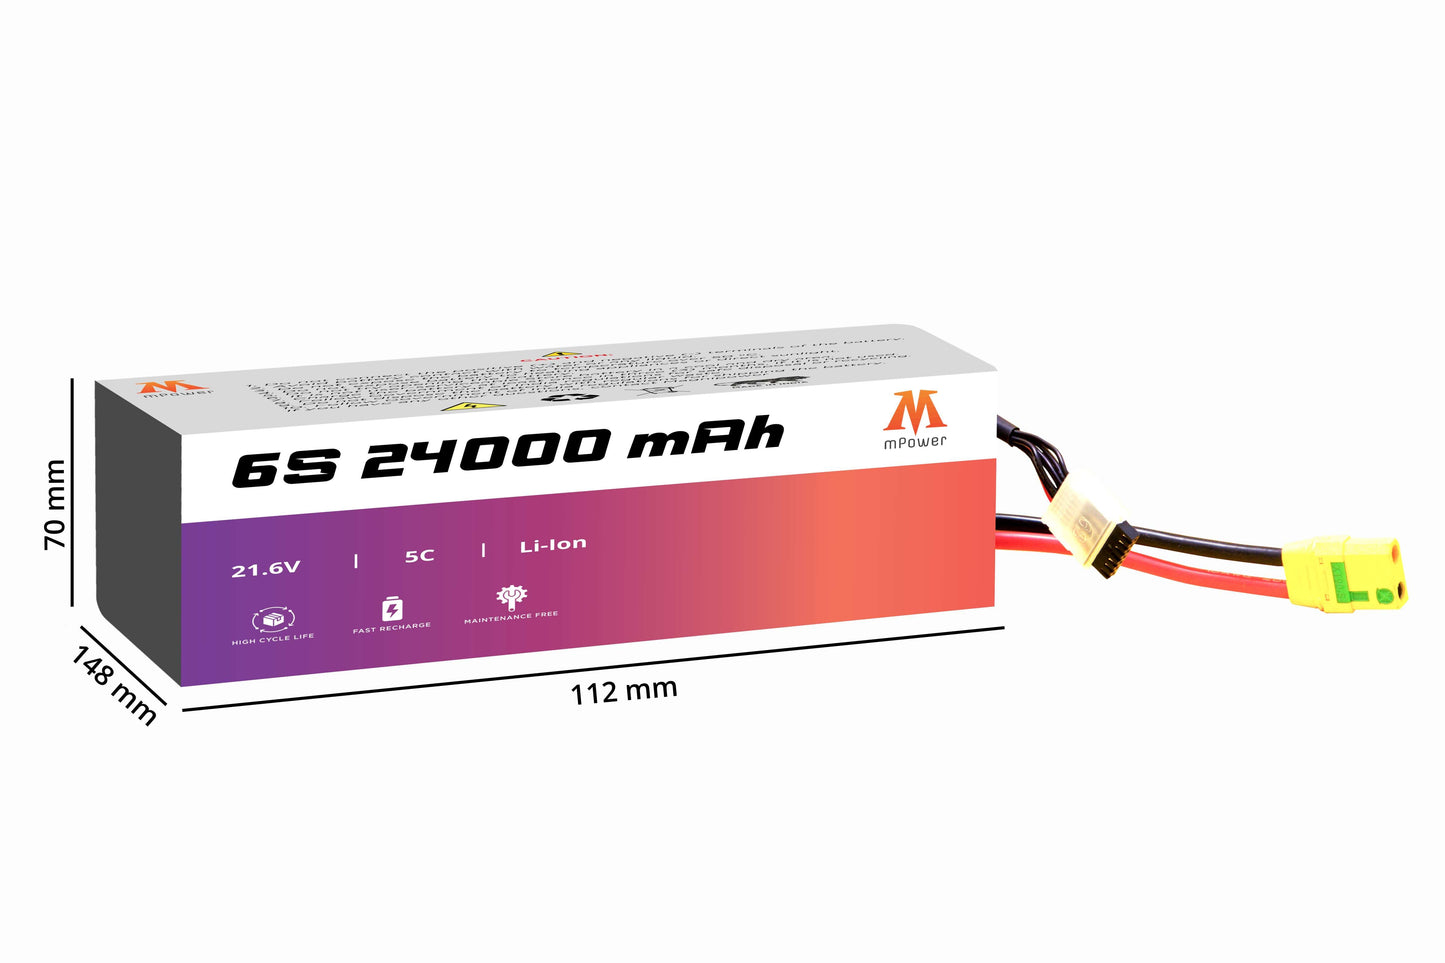 mPower 6S 24000mAh Lithium-Ion Battery for Surveillance Drones